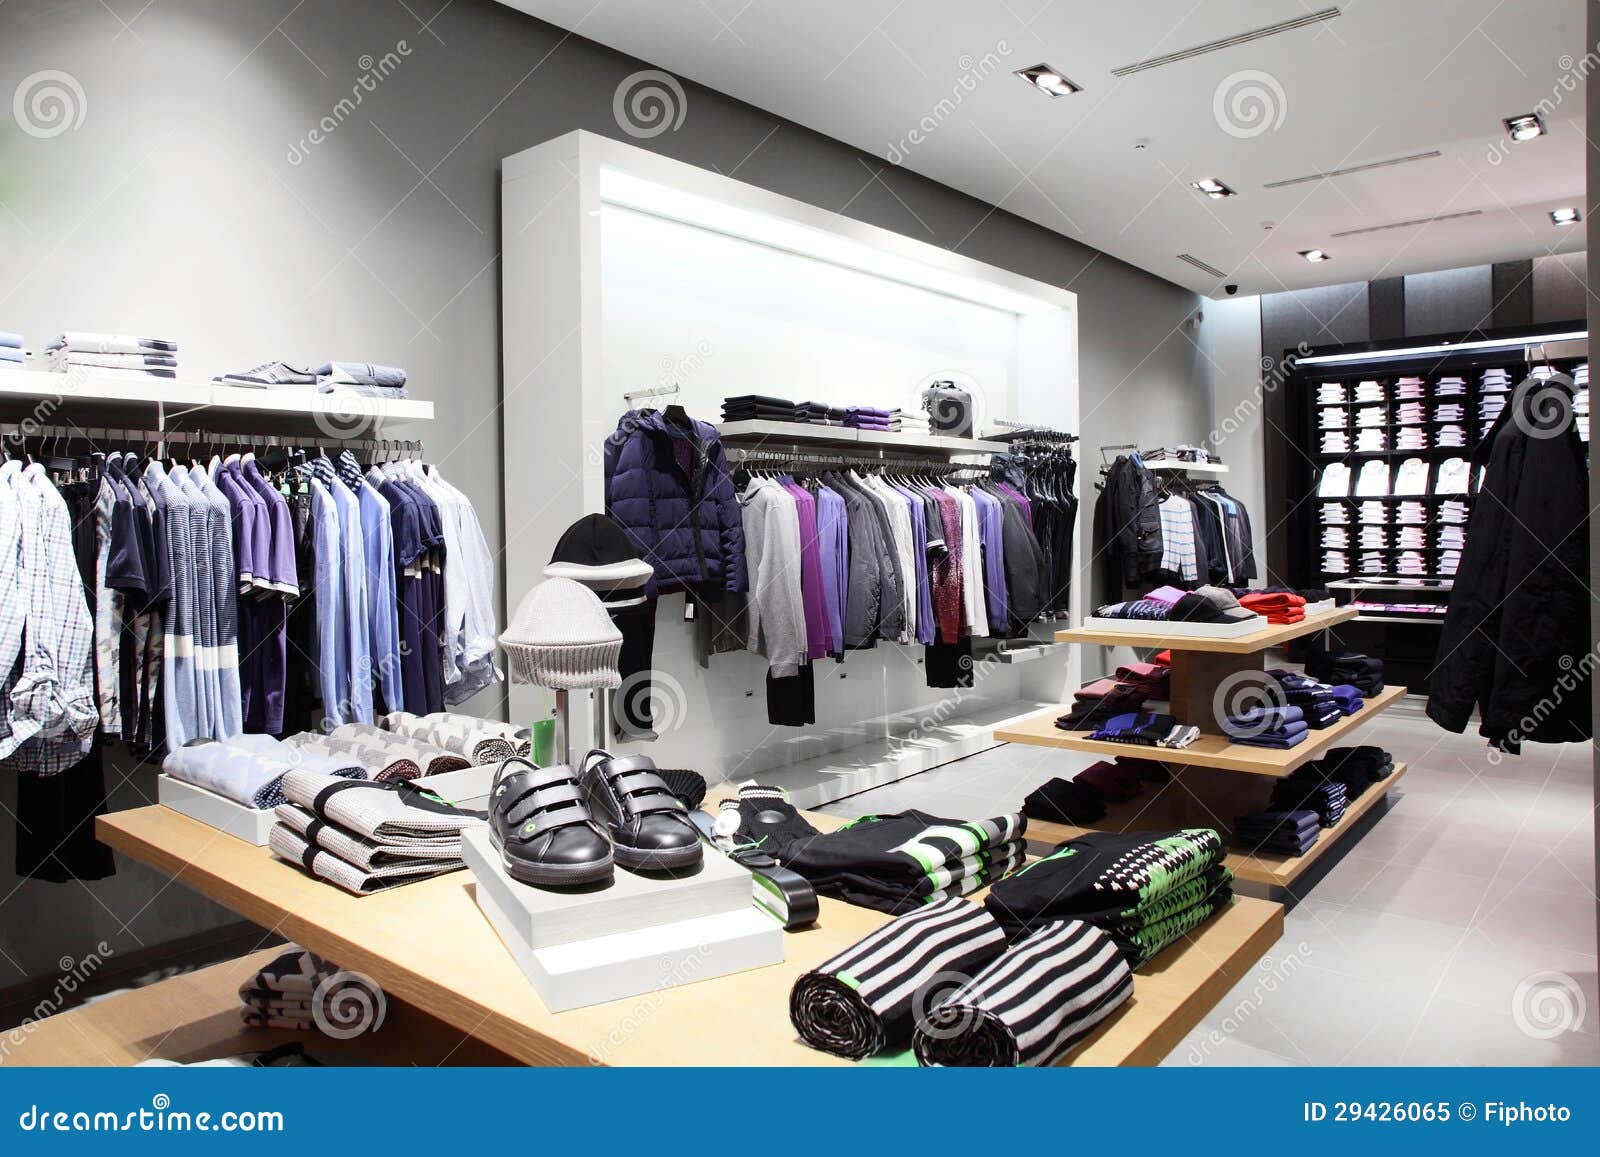 Modern and Fashion Clothes Store Stock Image - Image of commercial ...